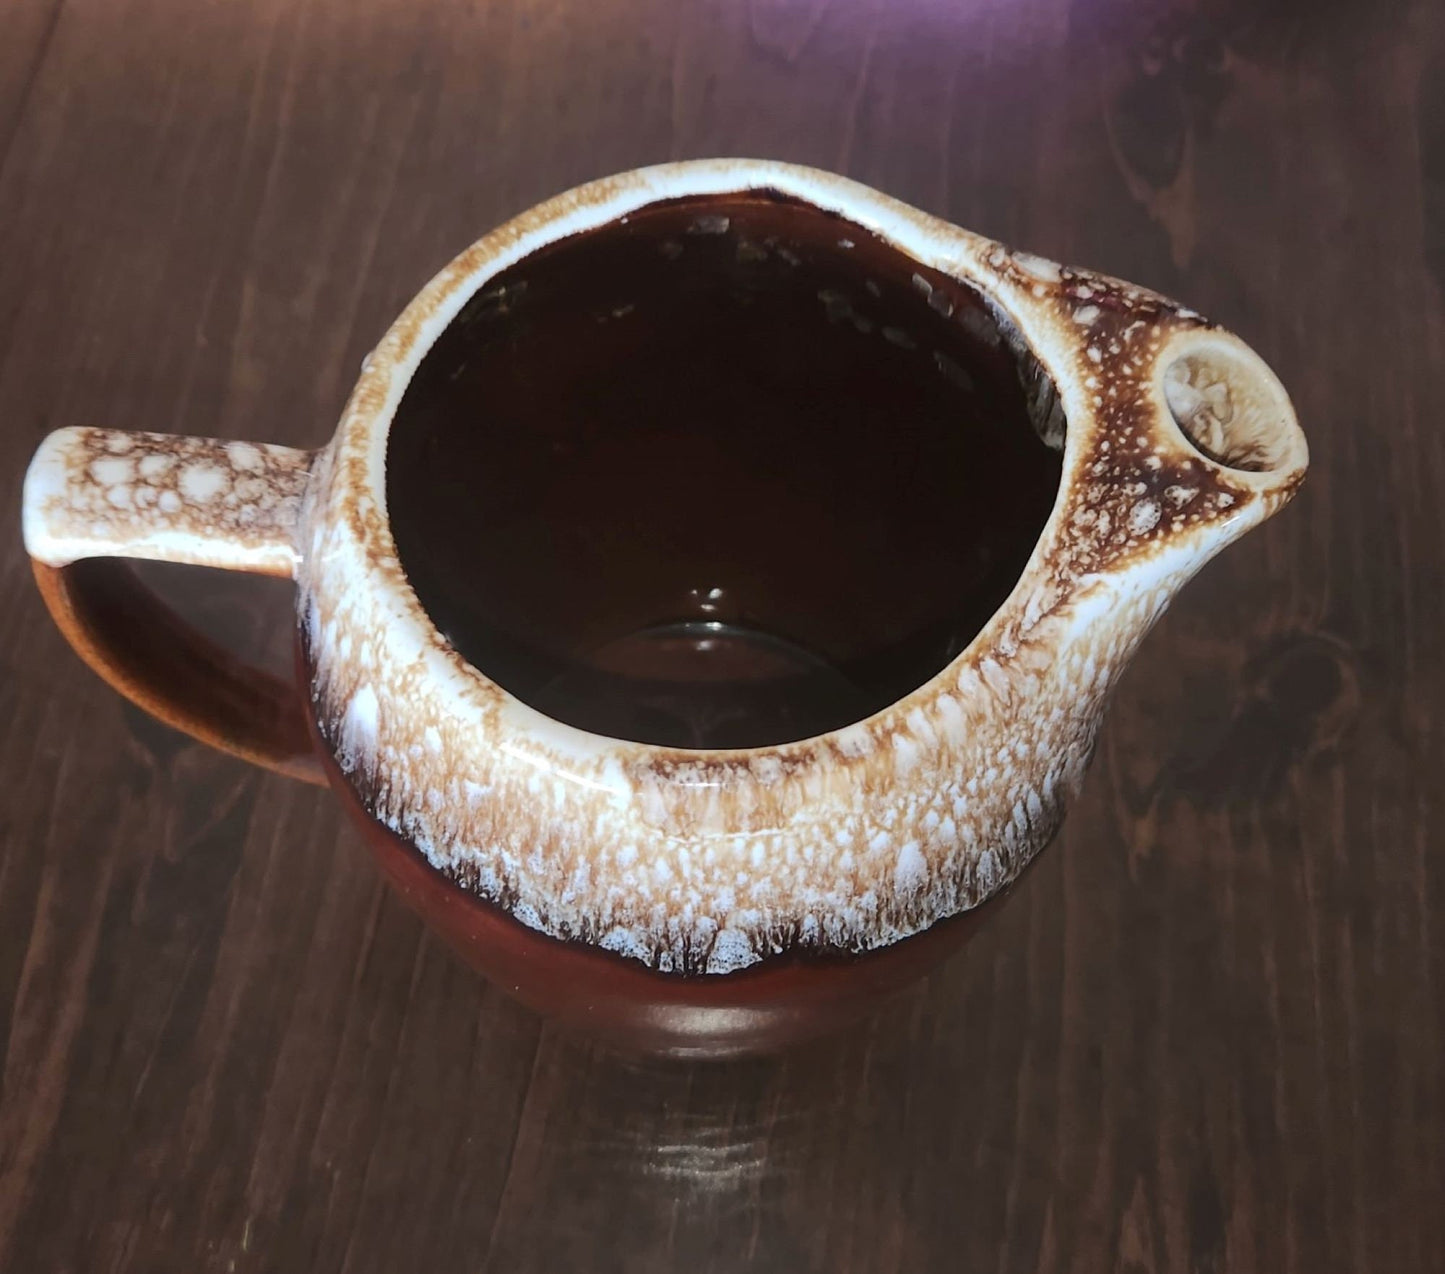 Stunning Brown Drip Glaze Water Pitcher by McCoy Pottery